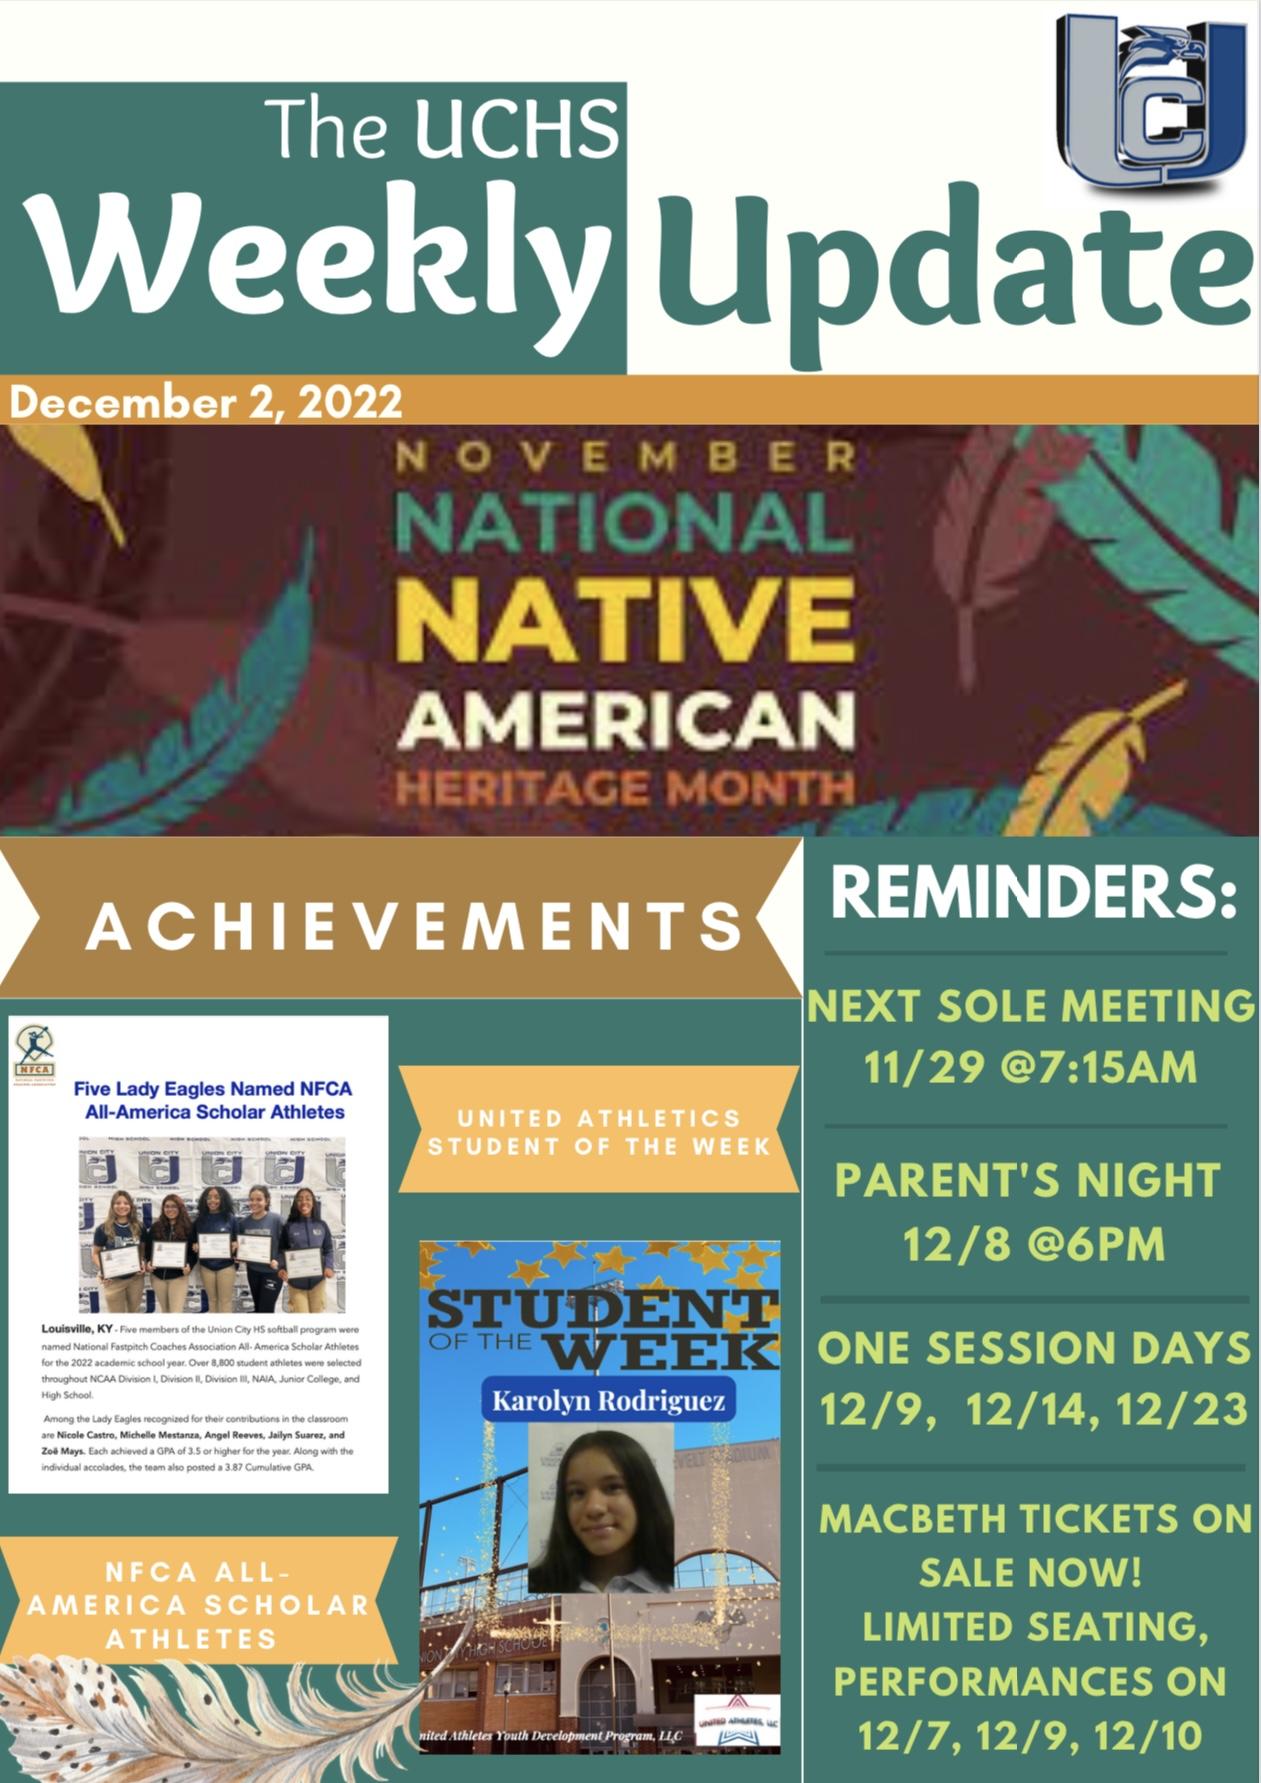 The UCHS Weekly Update-December 2, 2022-English-Page 1